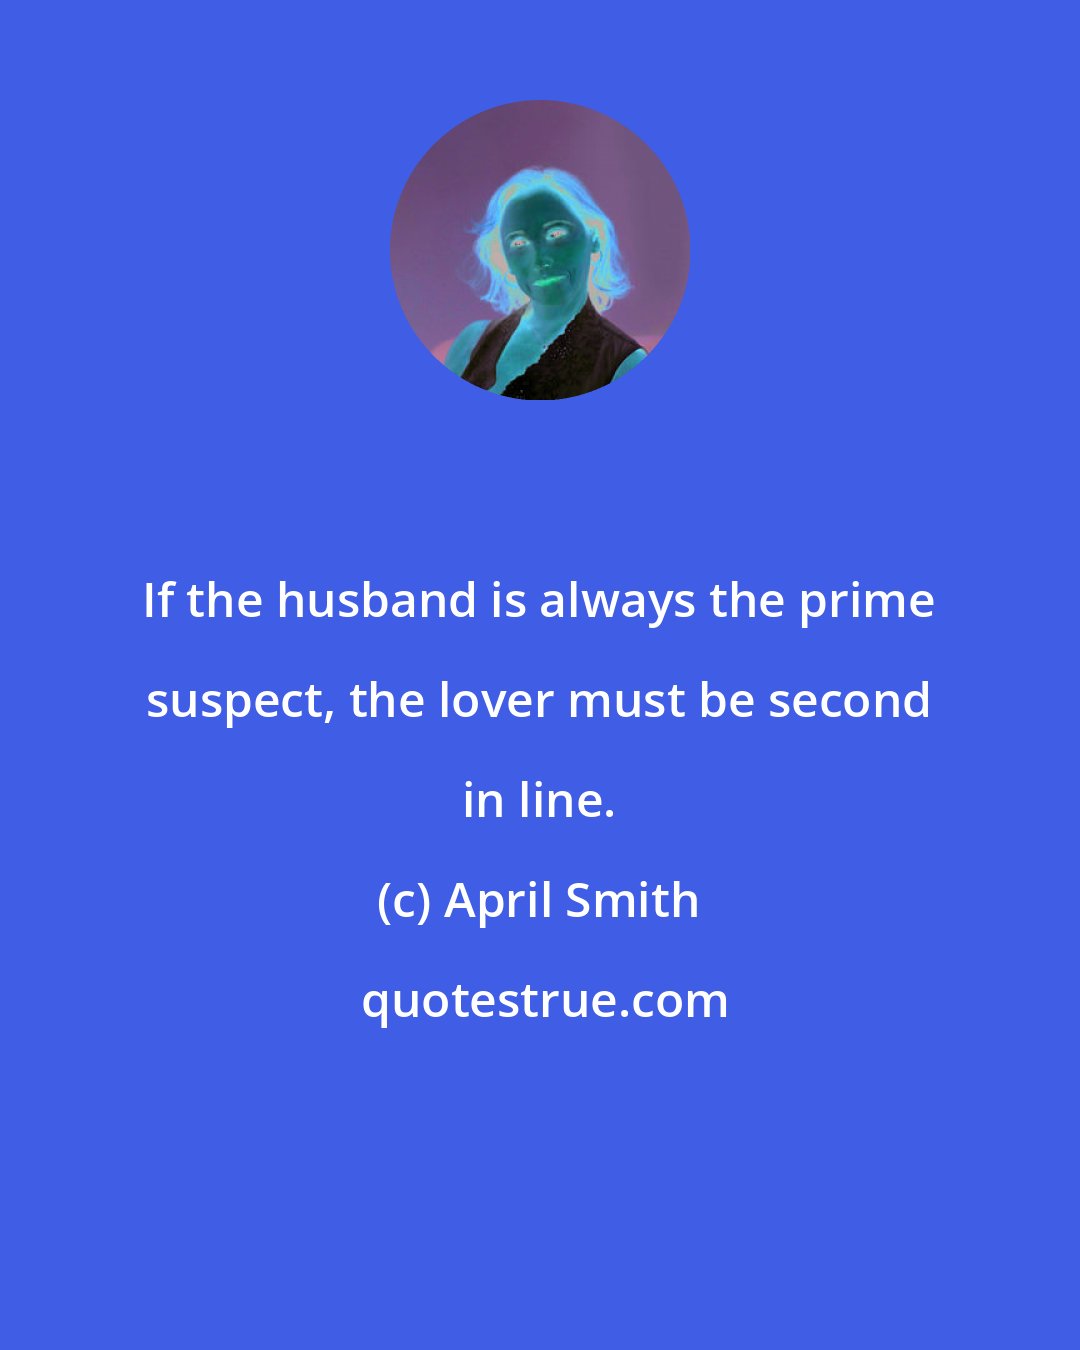 April Smith: If the husband is always the prime suspect, the lover must be second in line.